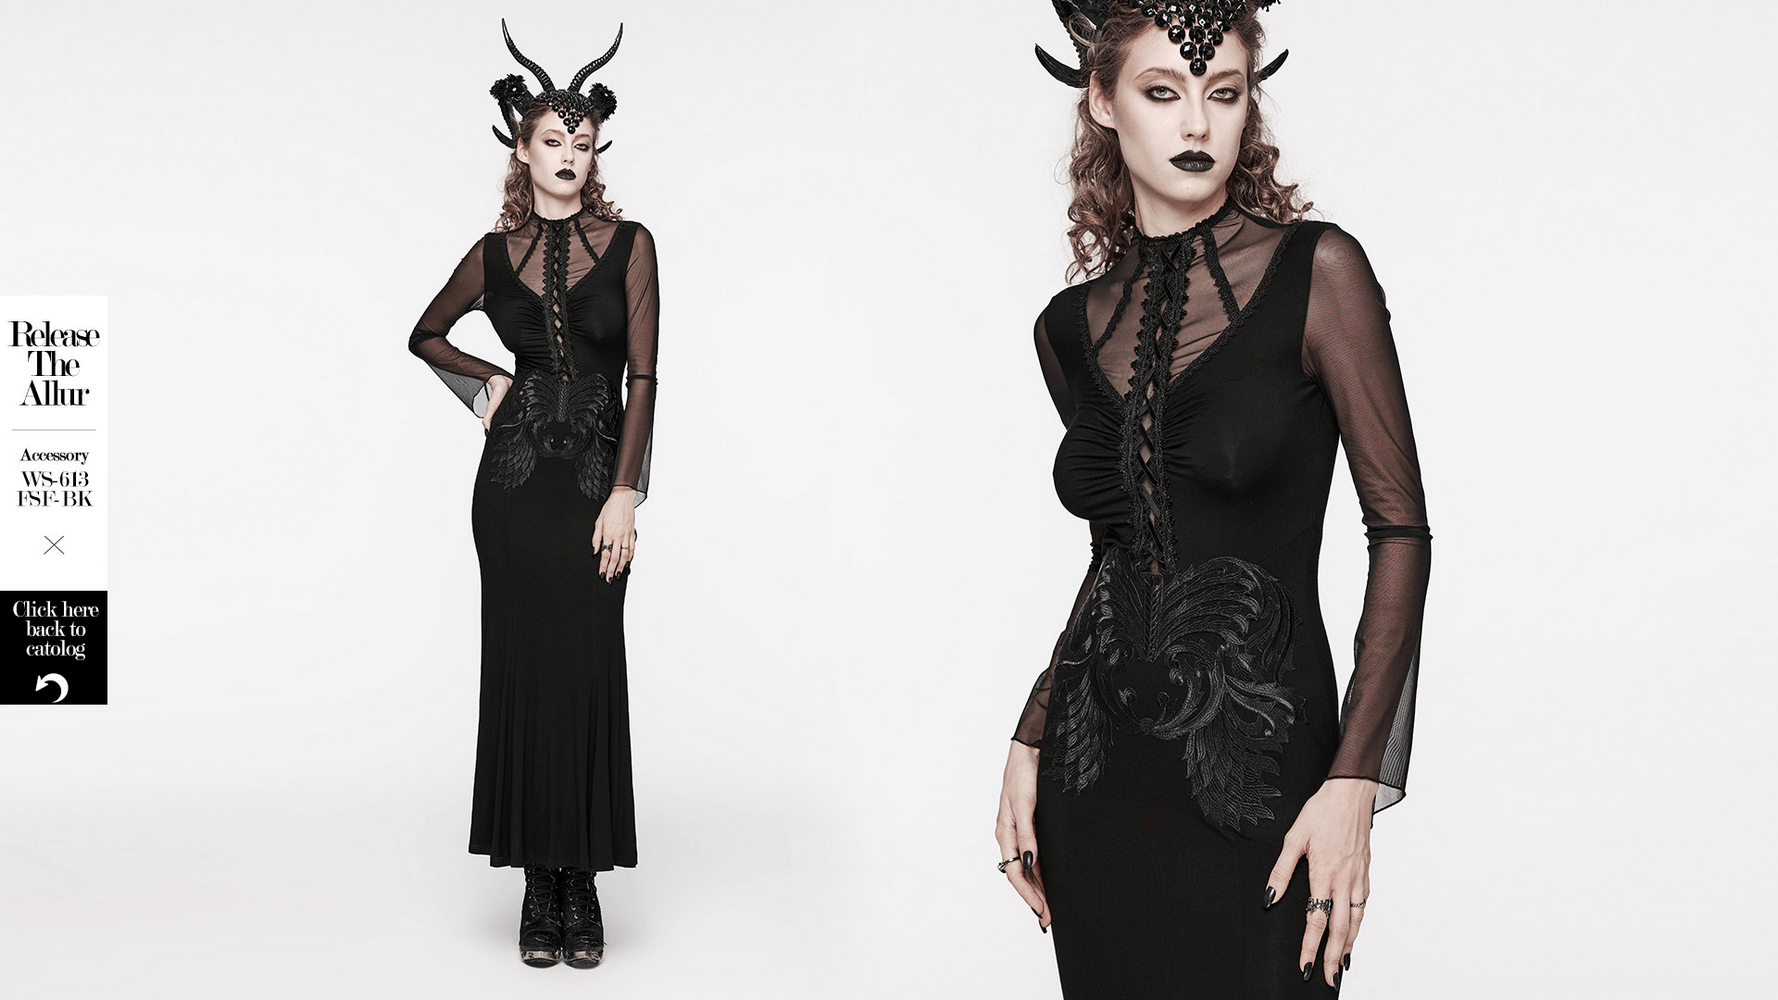 Gothic Women's Lace and Embroidery Mesh Dress